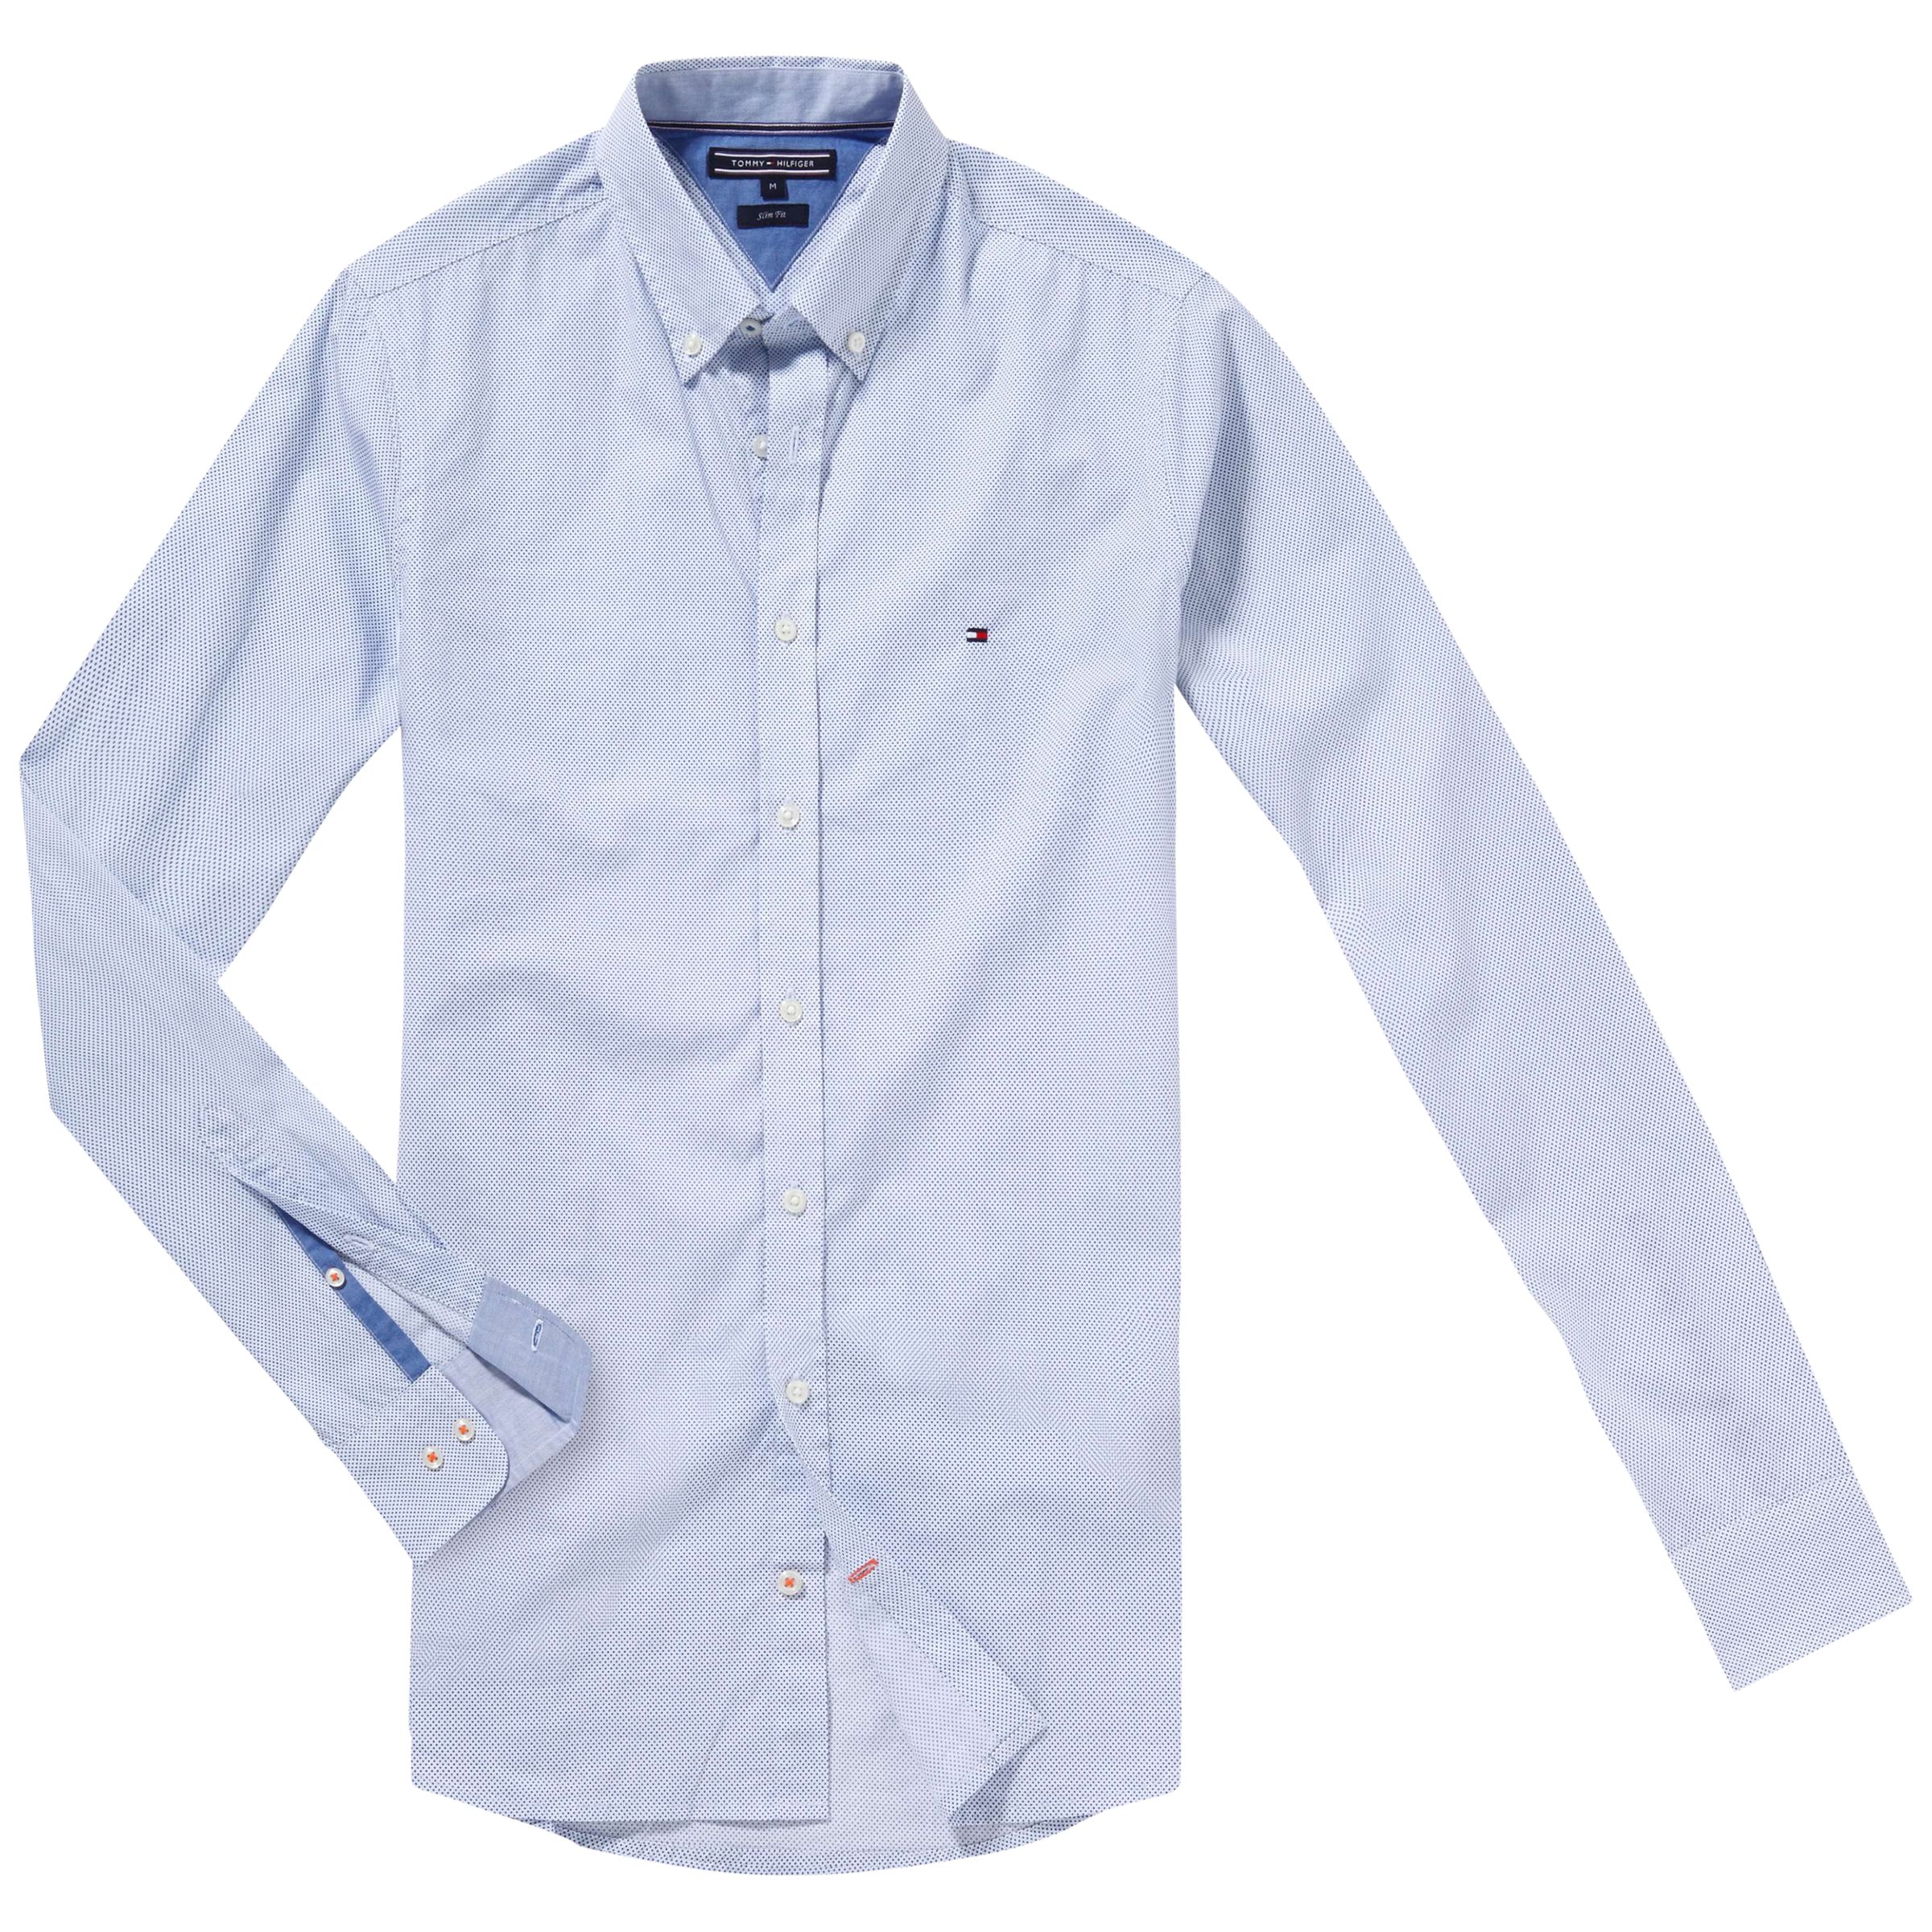 white and blue tommy hilfiger shirt